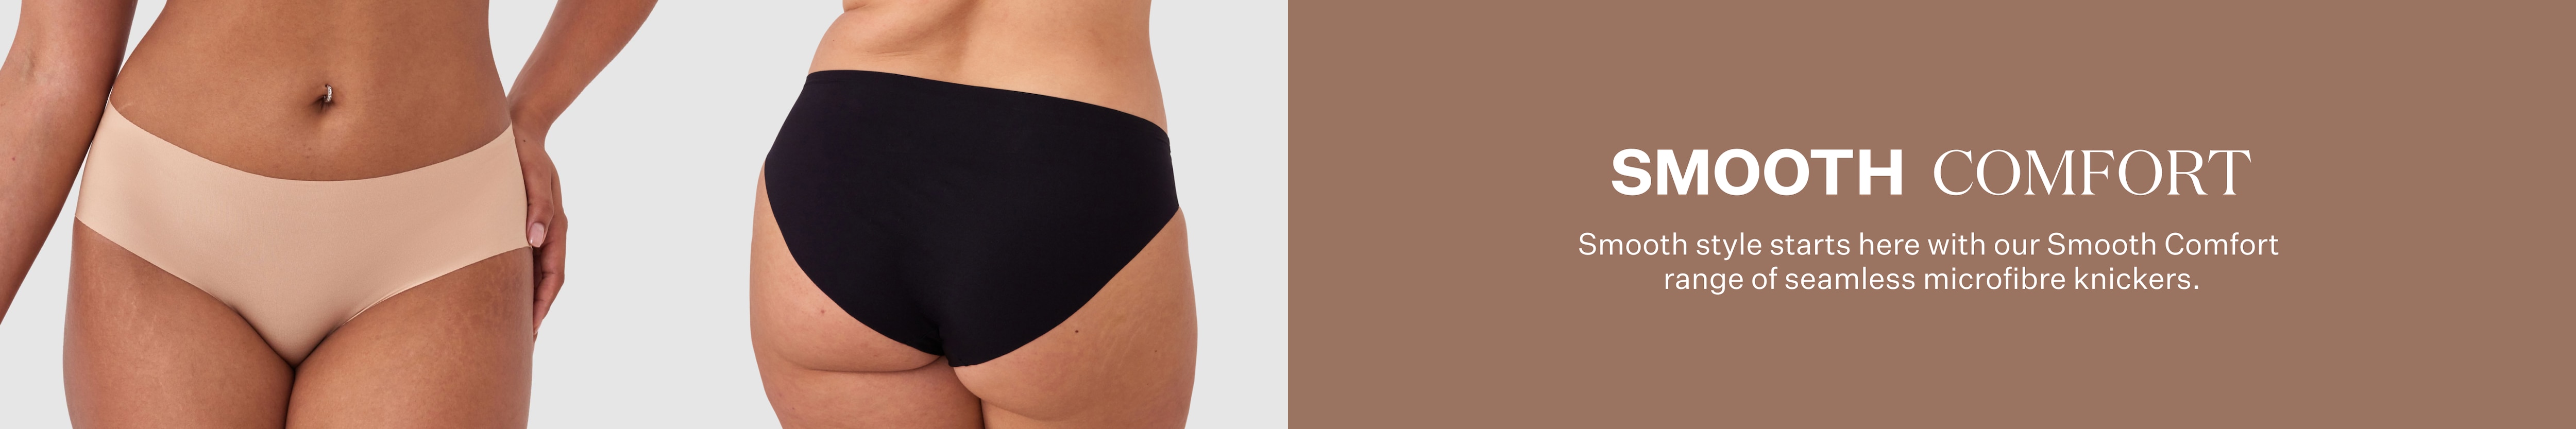 Smooth style starts here with our Smooth Comfort range of seamless microfibre knickers.